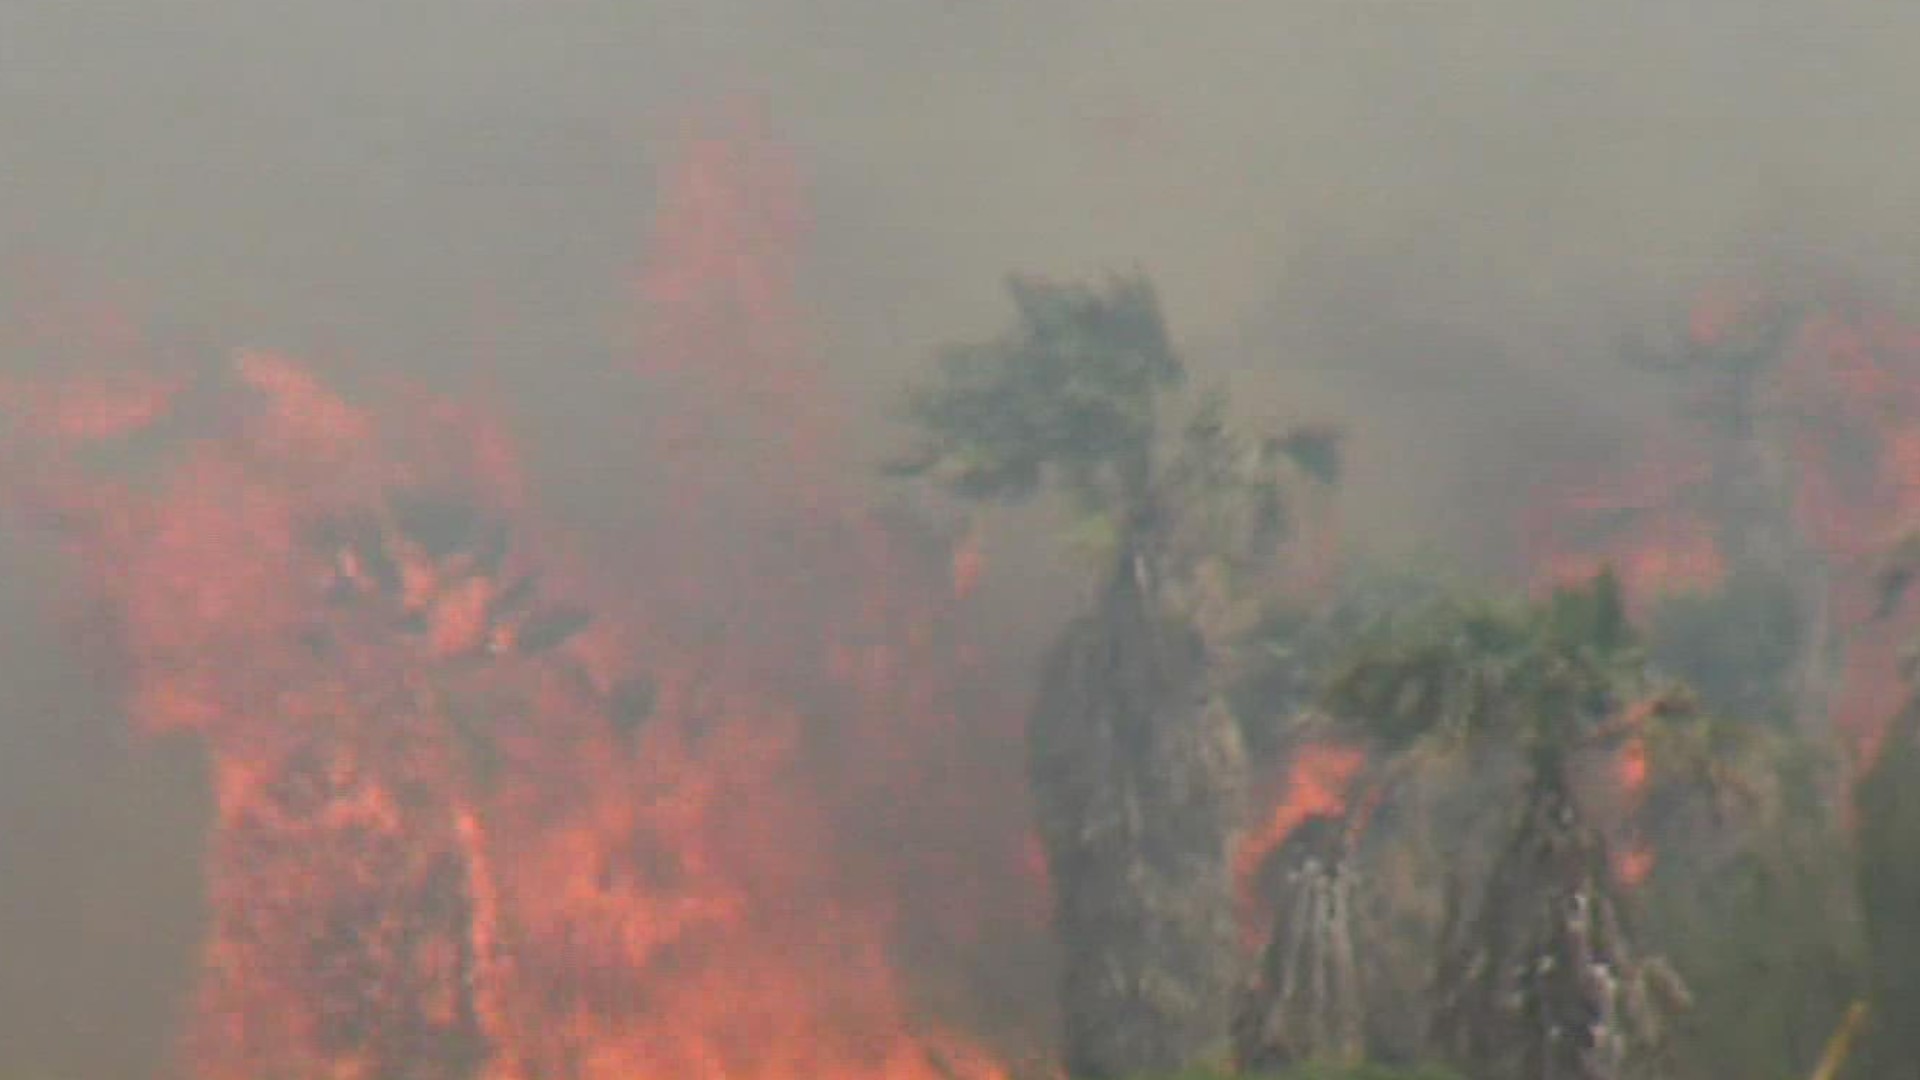 The fire ignited near a palm tree farm and area fire crews are stationed to help protect nearby homes.